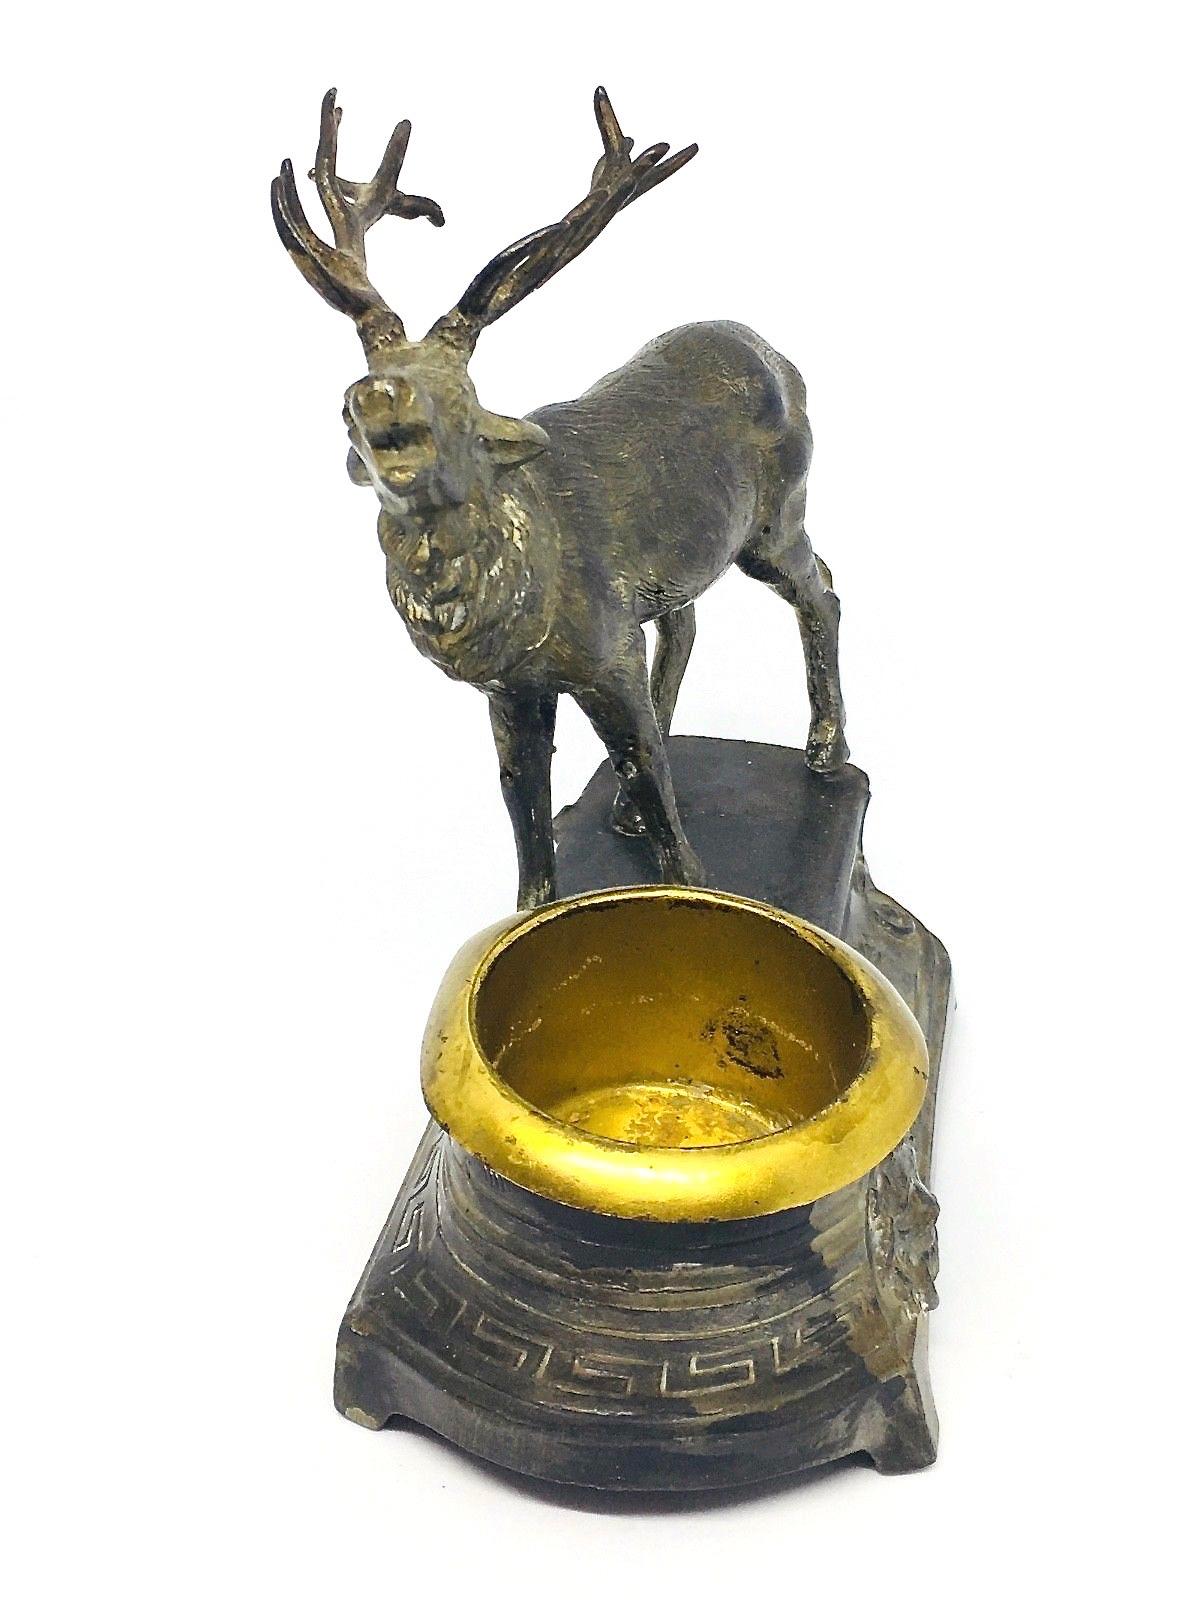 Gorgeous Austrian 1900s deer figurine on a base. Has a compartment to stow some stuff. It is marked with a number. Not signed.